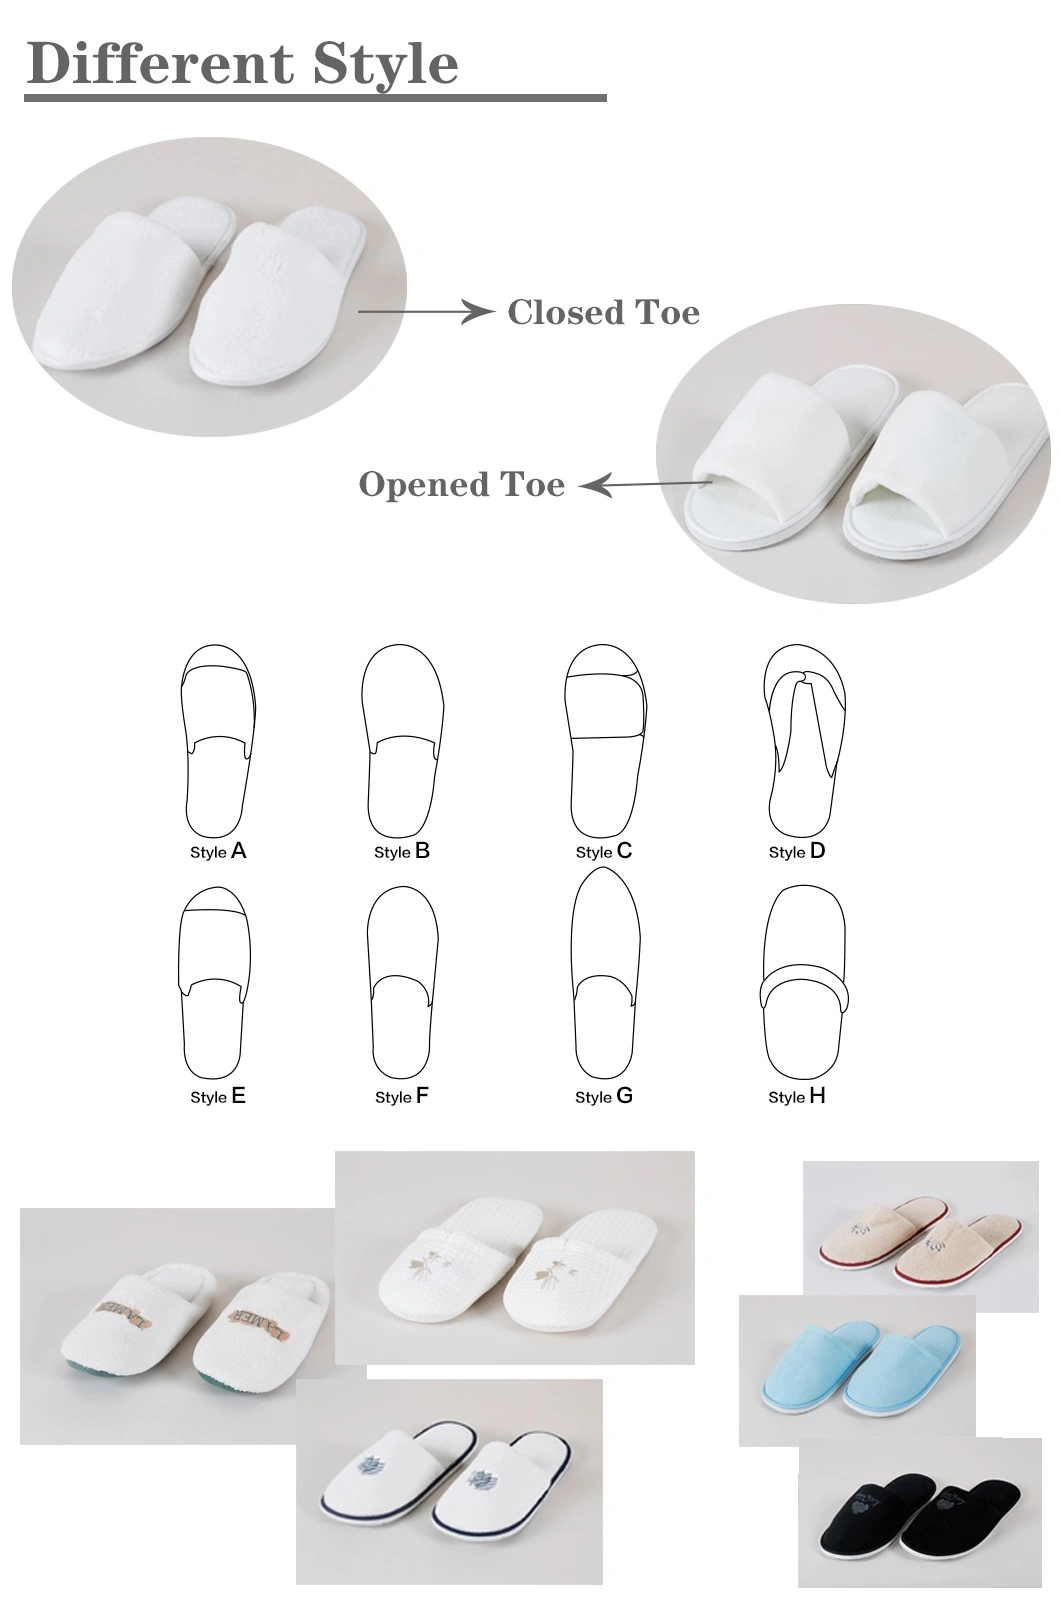 Custom Shoes High Quality Cotton Burlap Open Toe Spring Slipper Indoor House Slippers